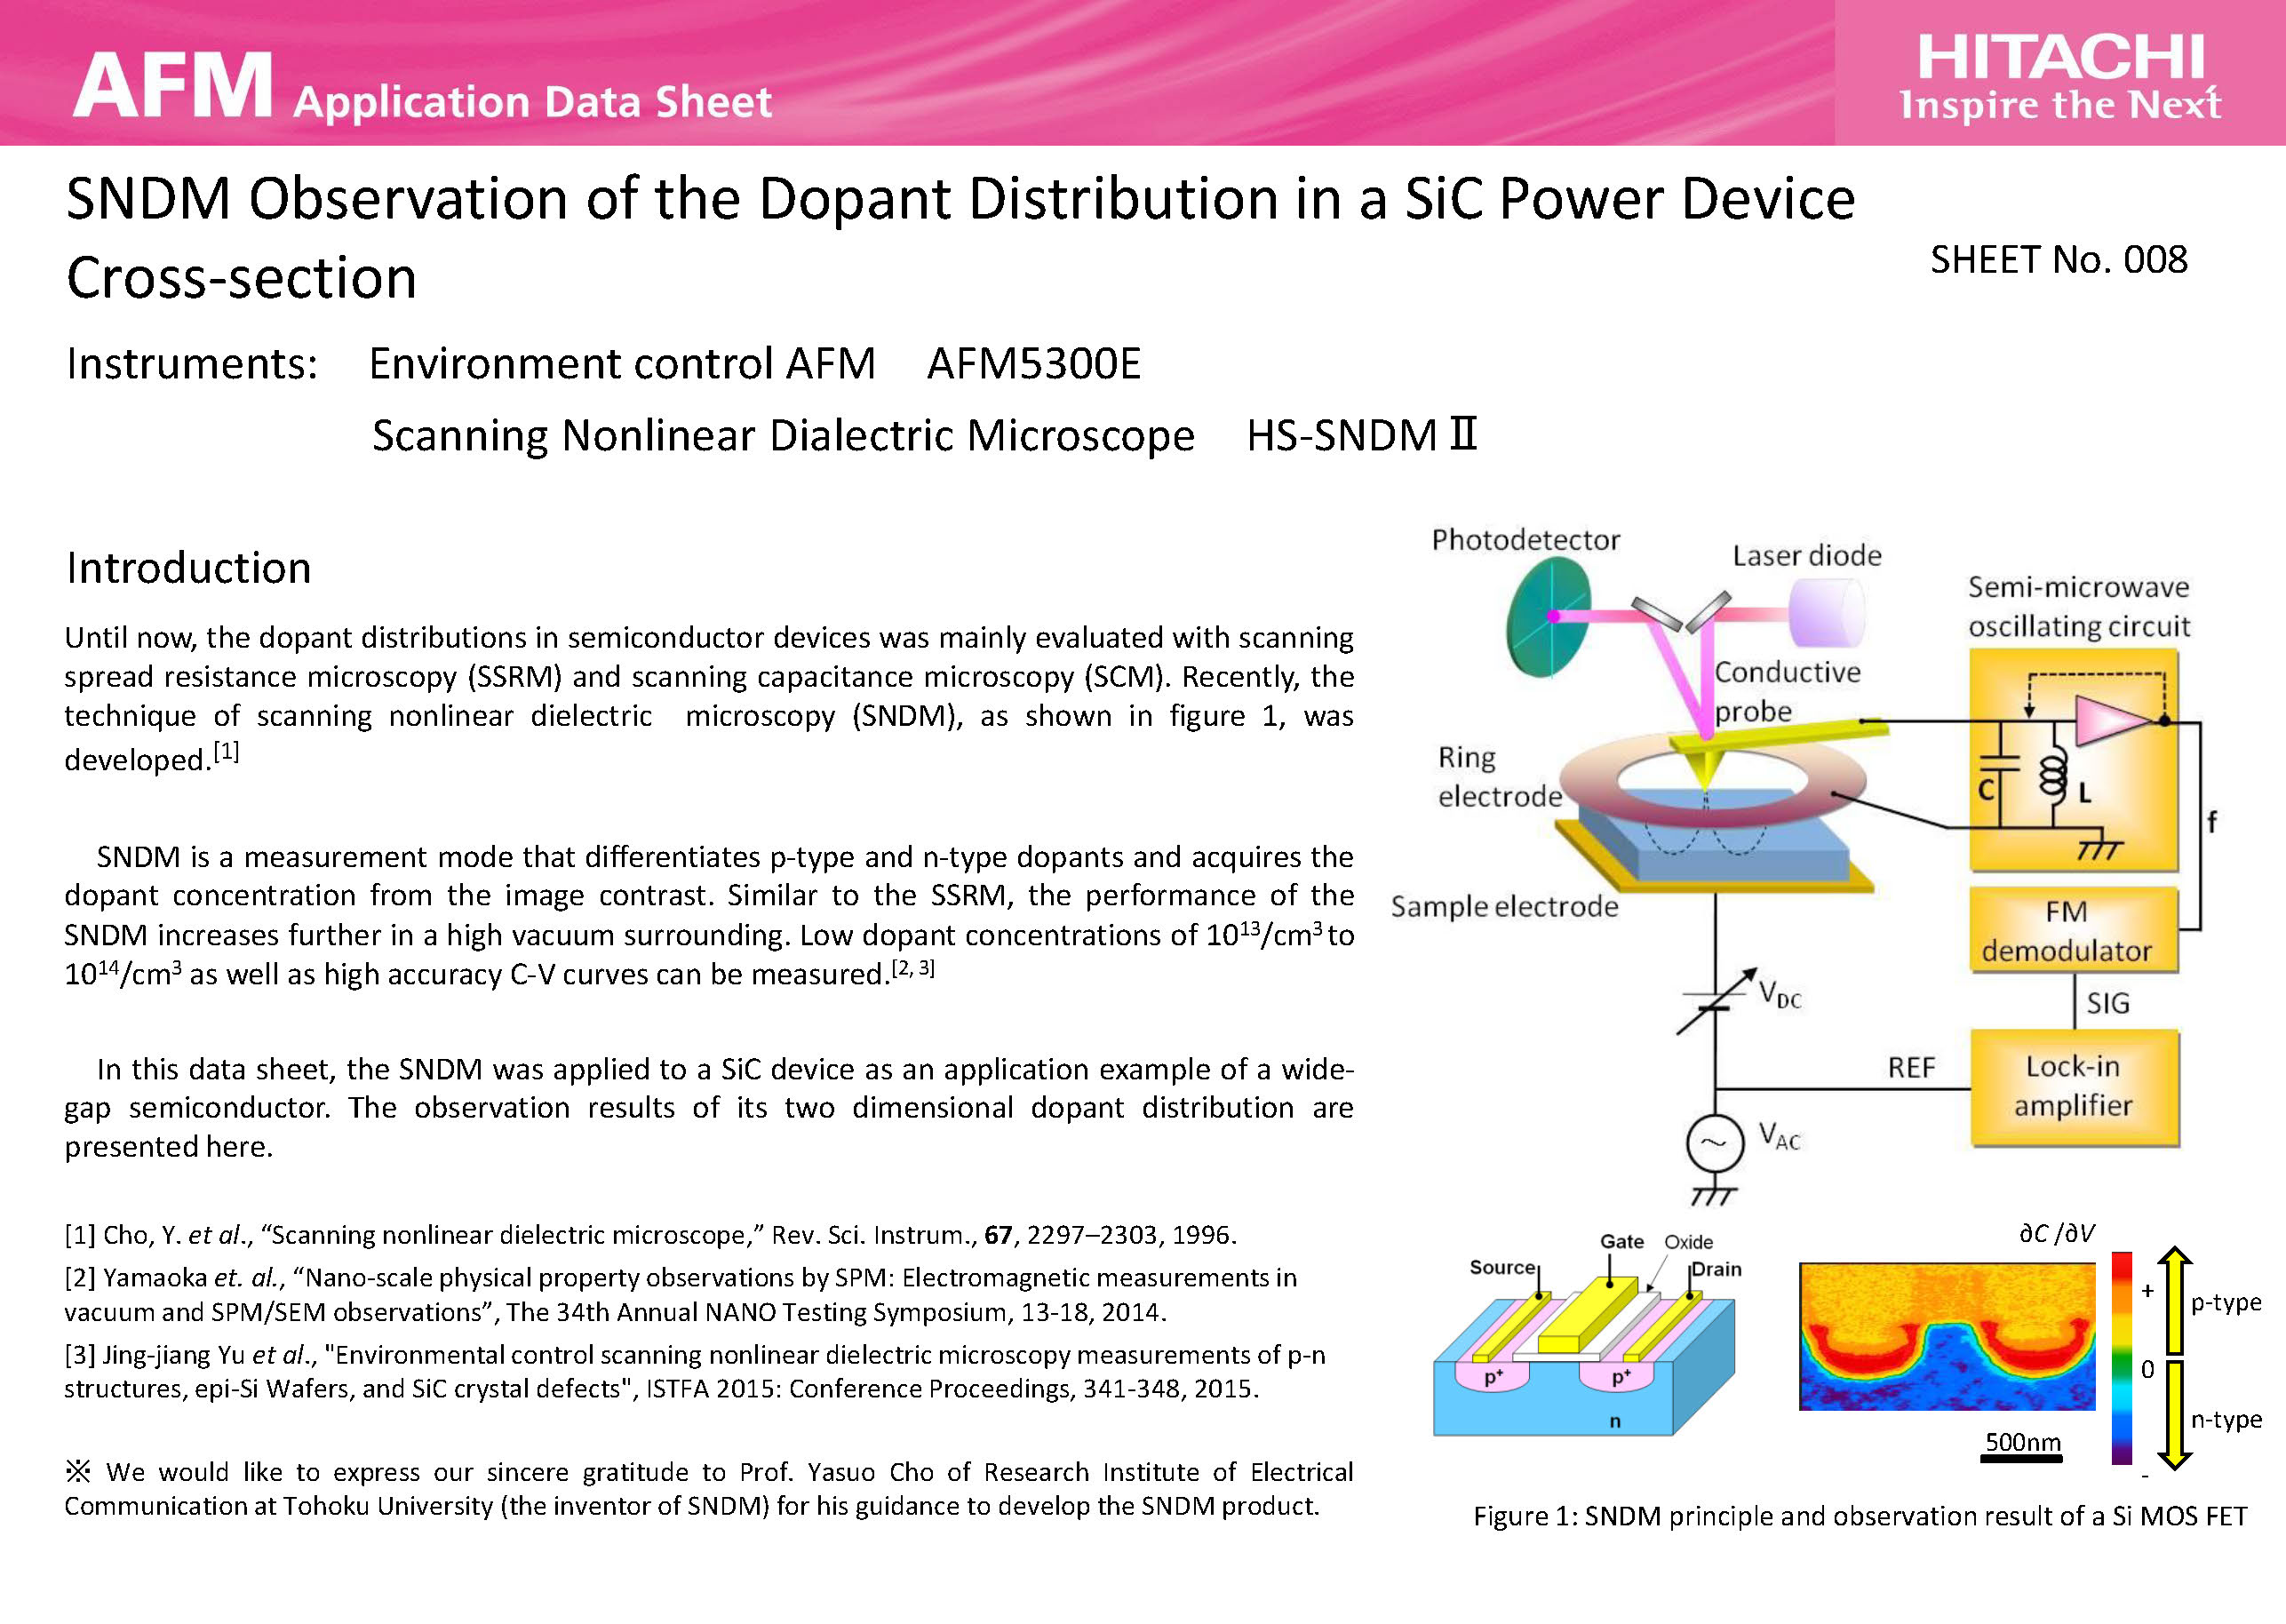 SNDM Observation of the Dopant Distribution in a SiC Power Device Cross-section